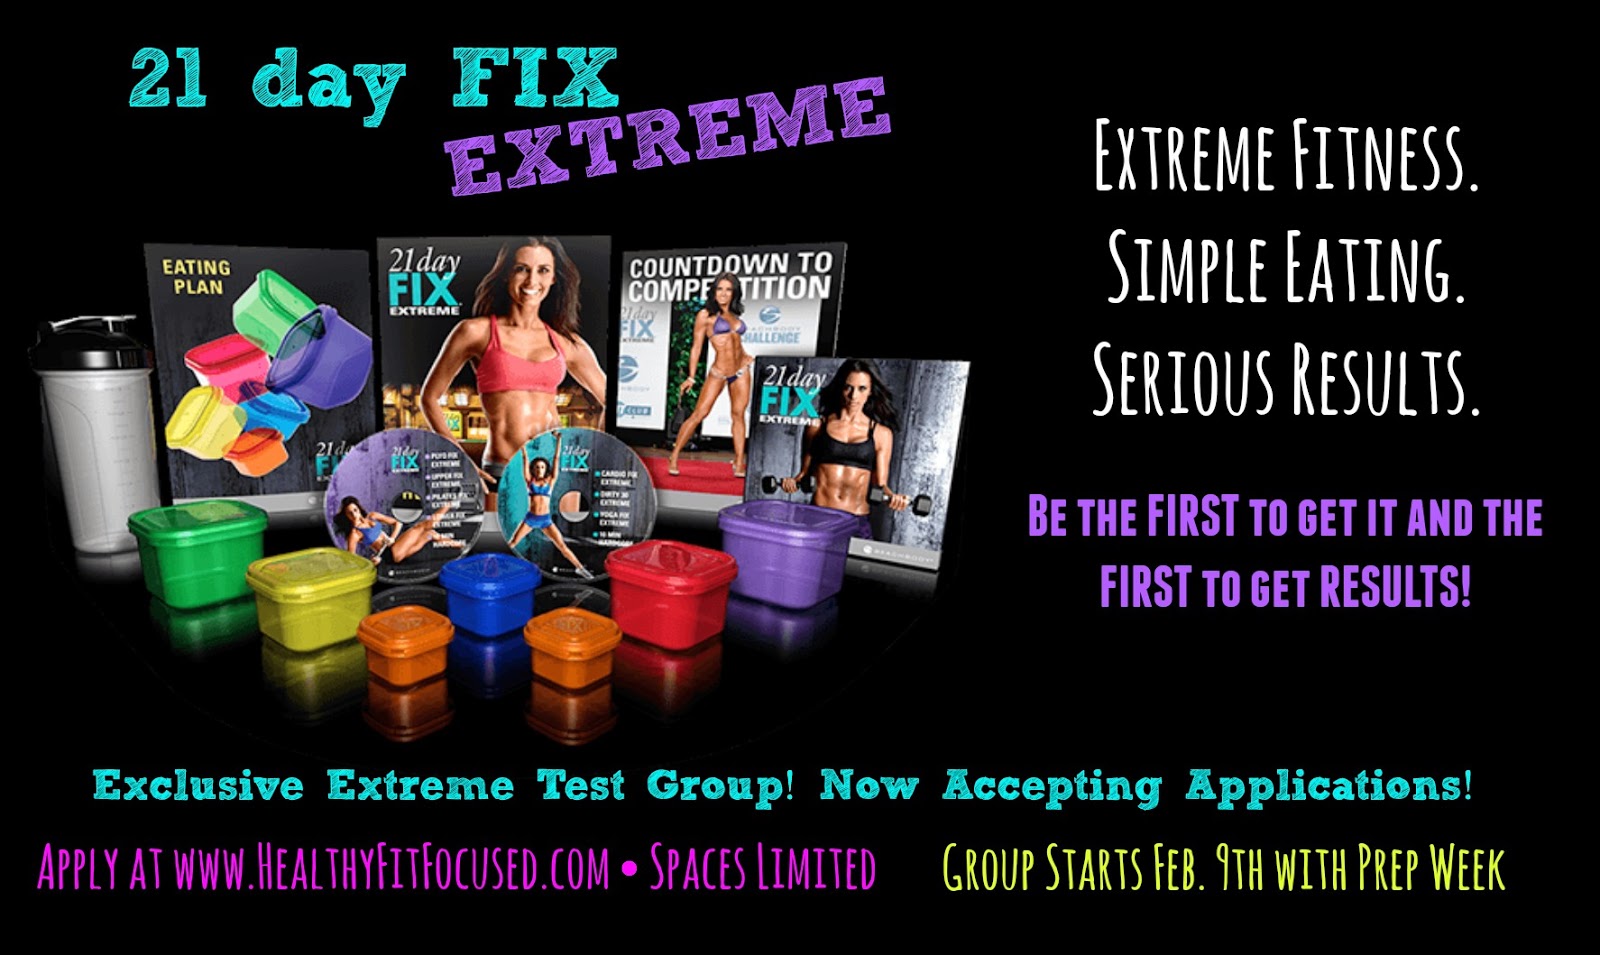 21 Day Fix Extreme, Autumn Calabrese, Get yours first and be a part of an Exclusive Extreme Test Group, Julie Little, www.HealthyFitFocused.com 